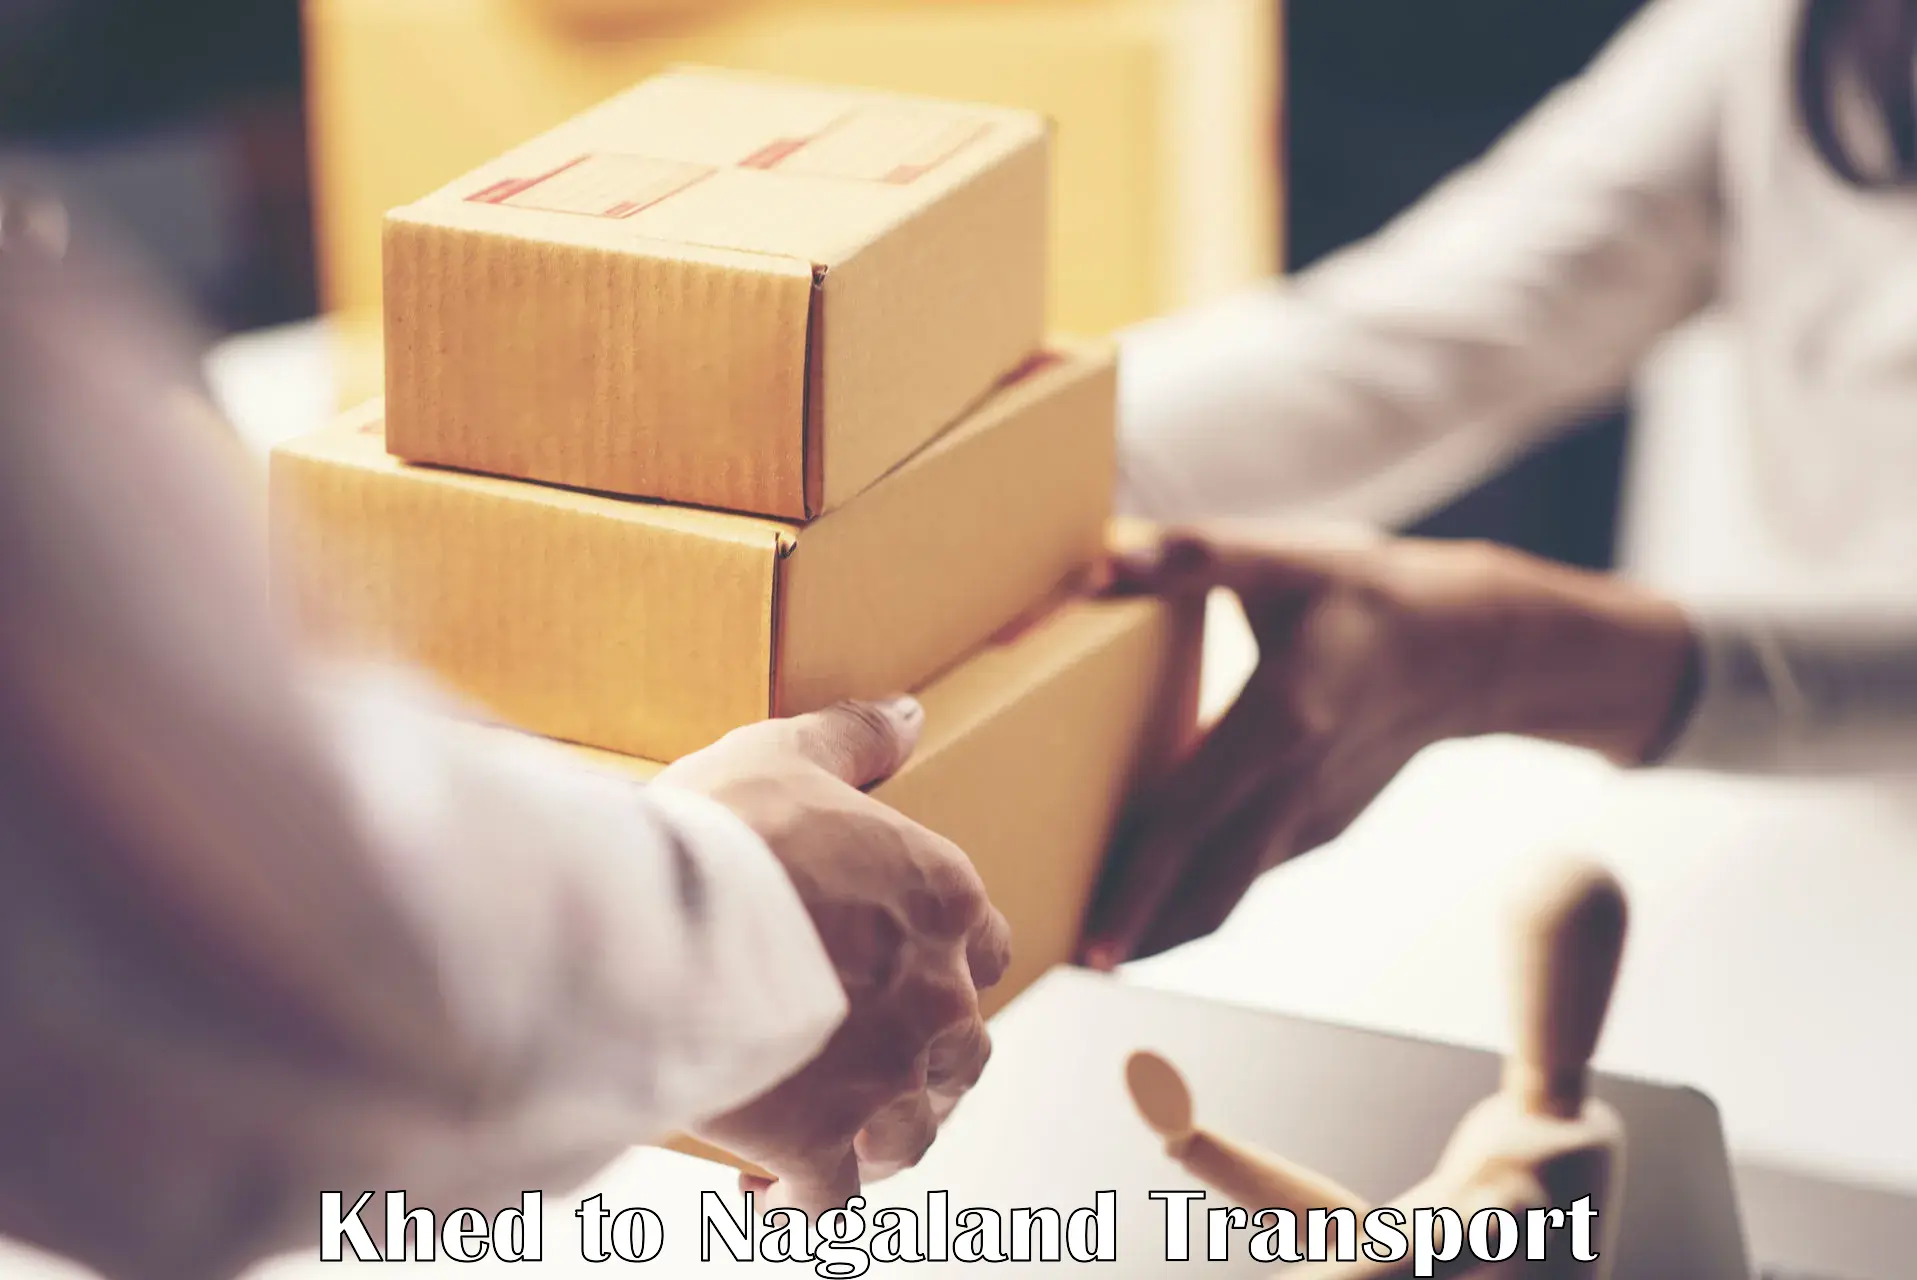 Shipping services in Khed to Peren